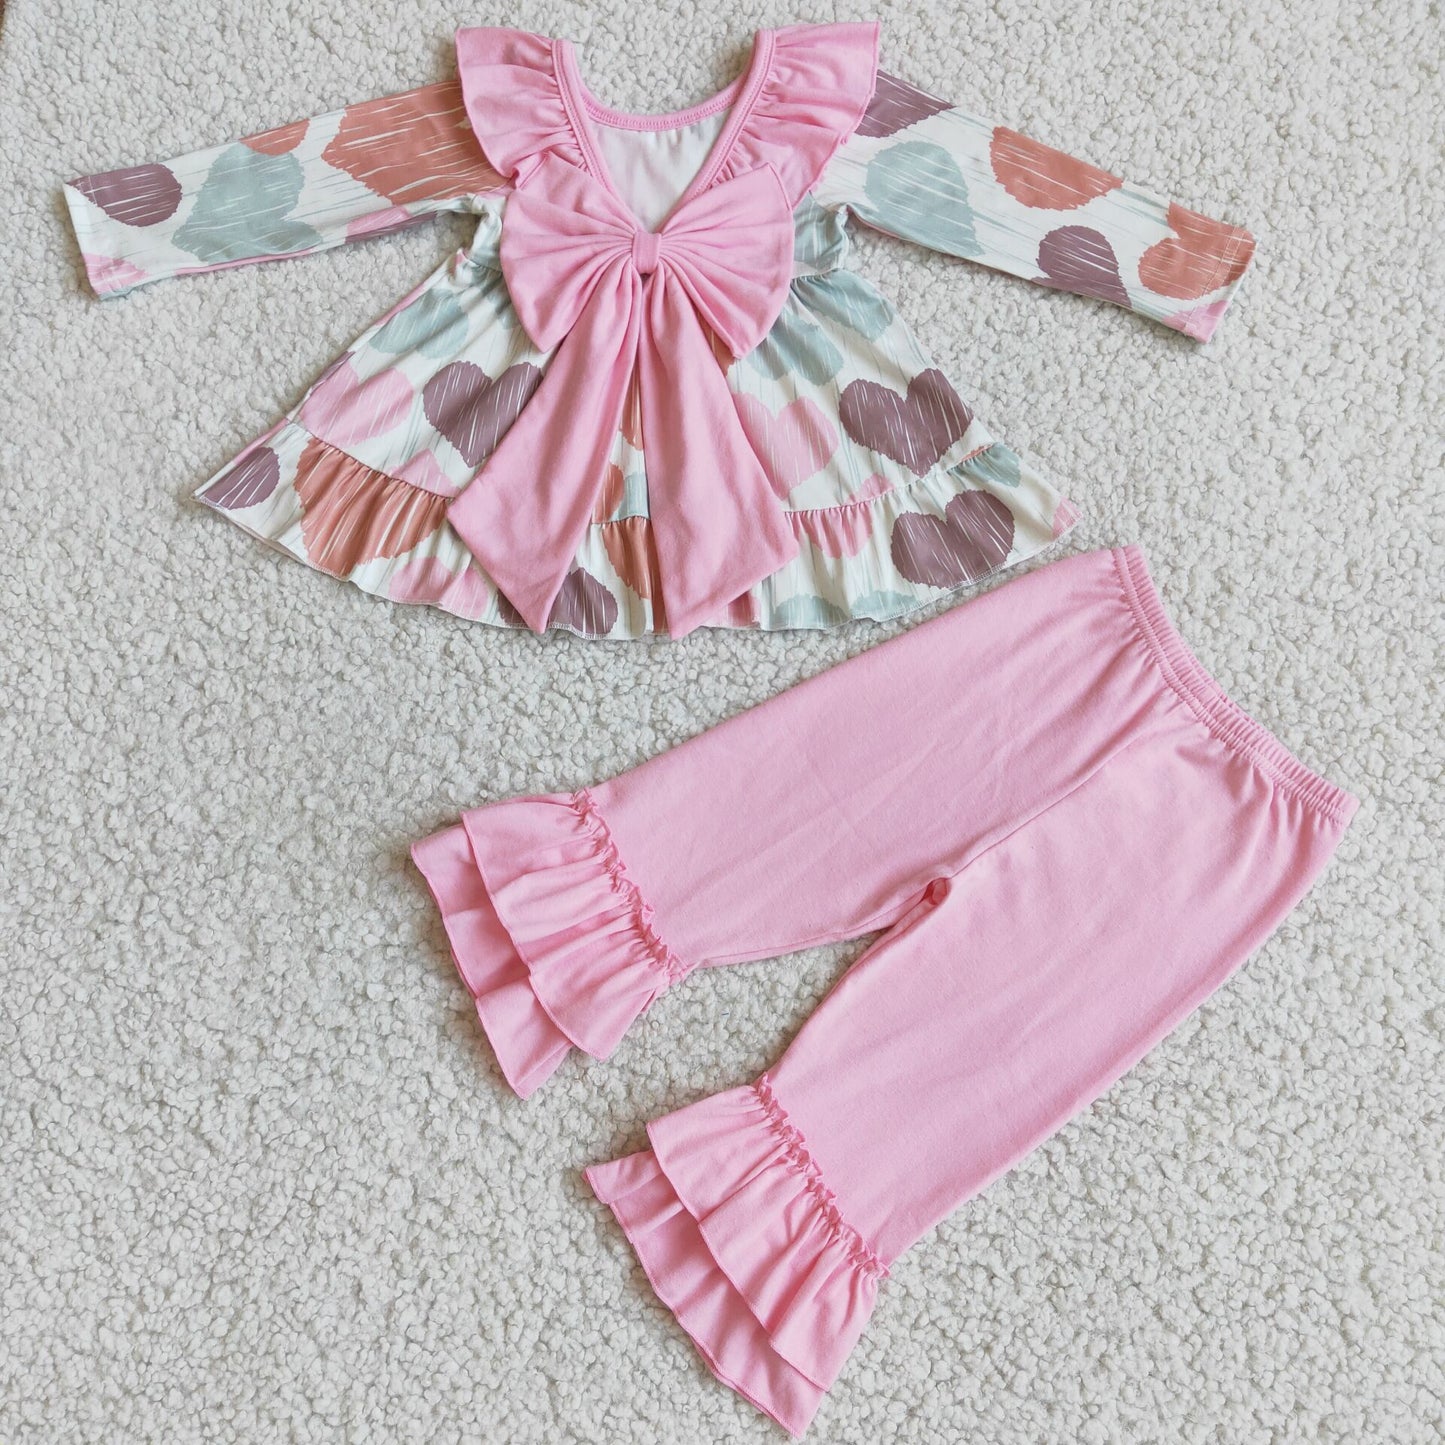 6 B6-24 Valentine Heart Bow Girl Outfits